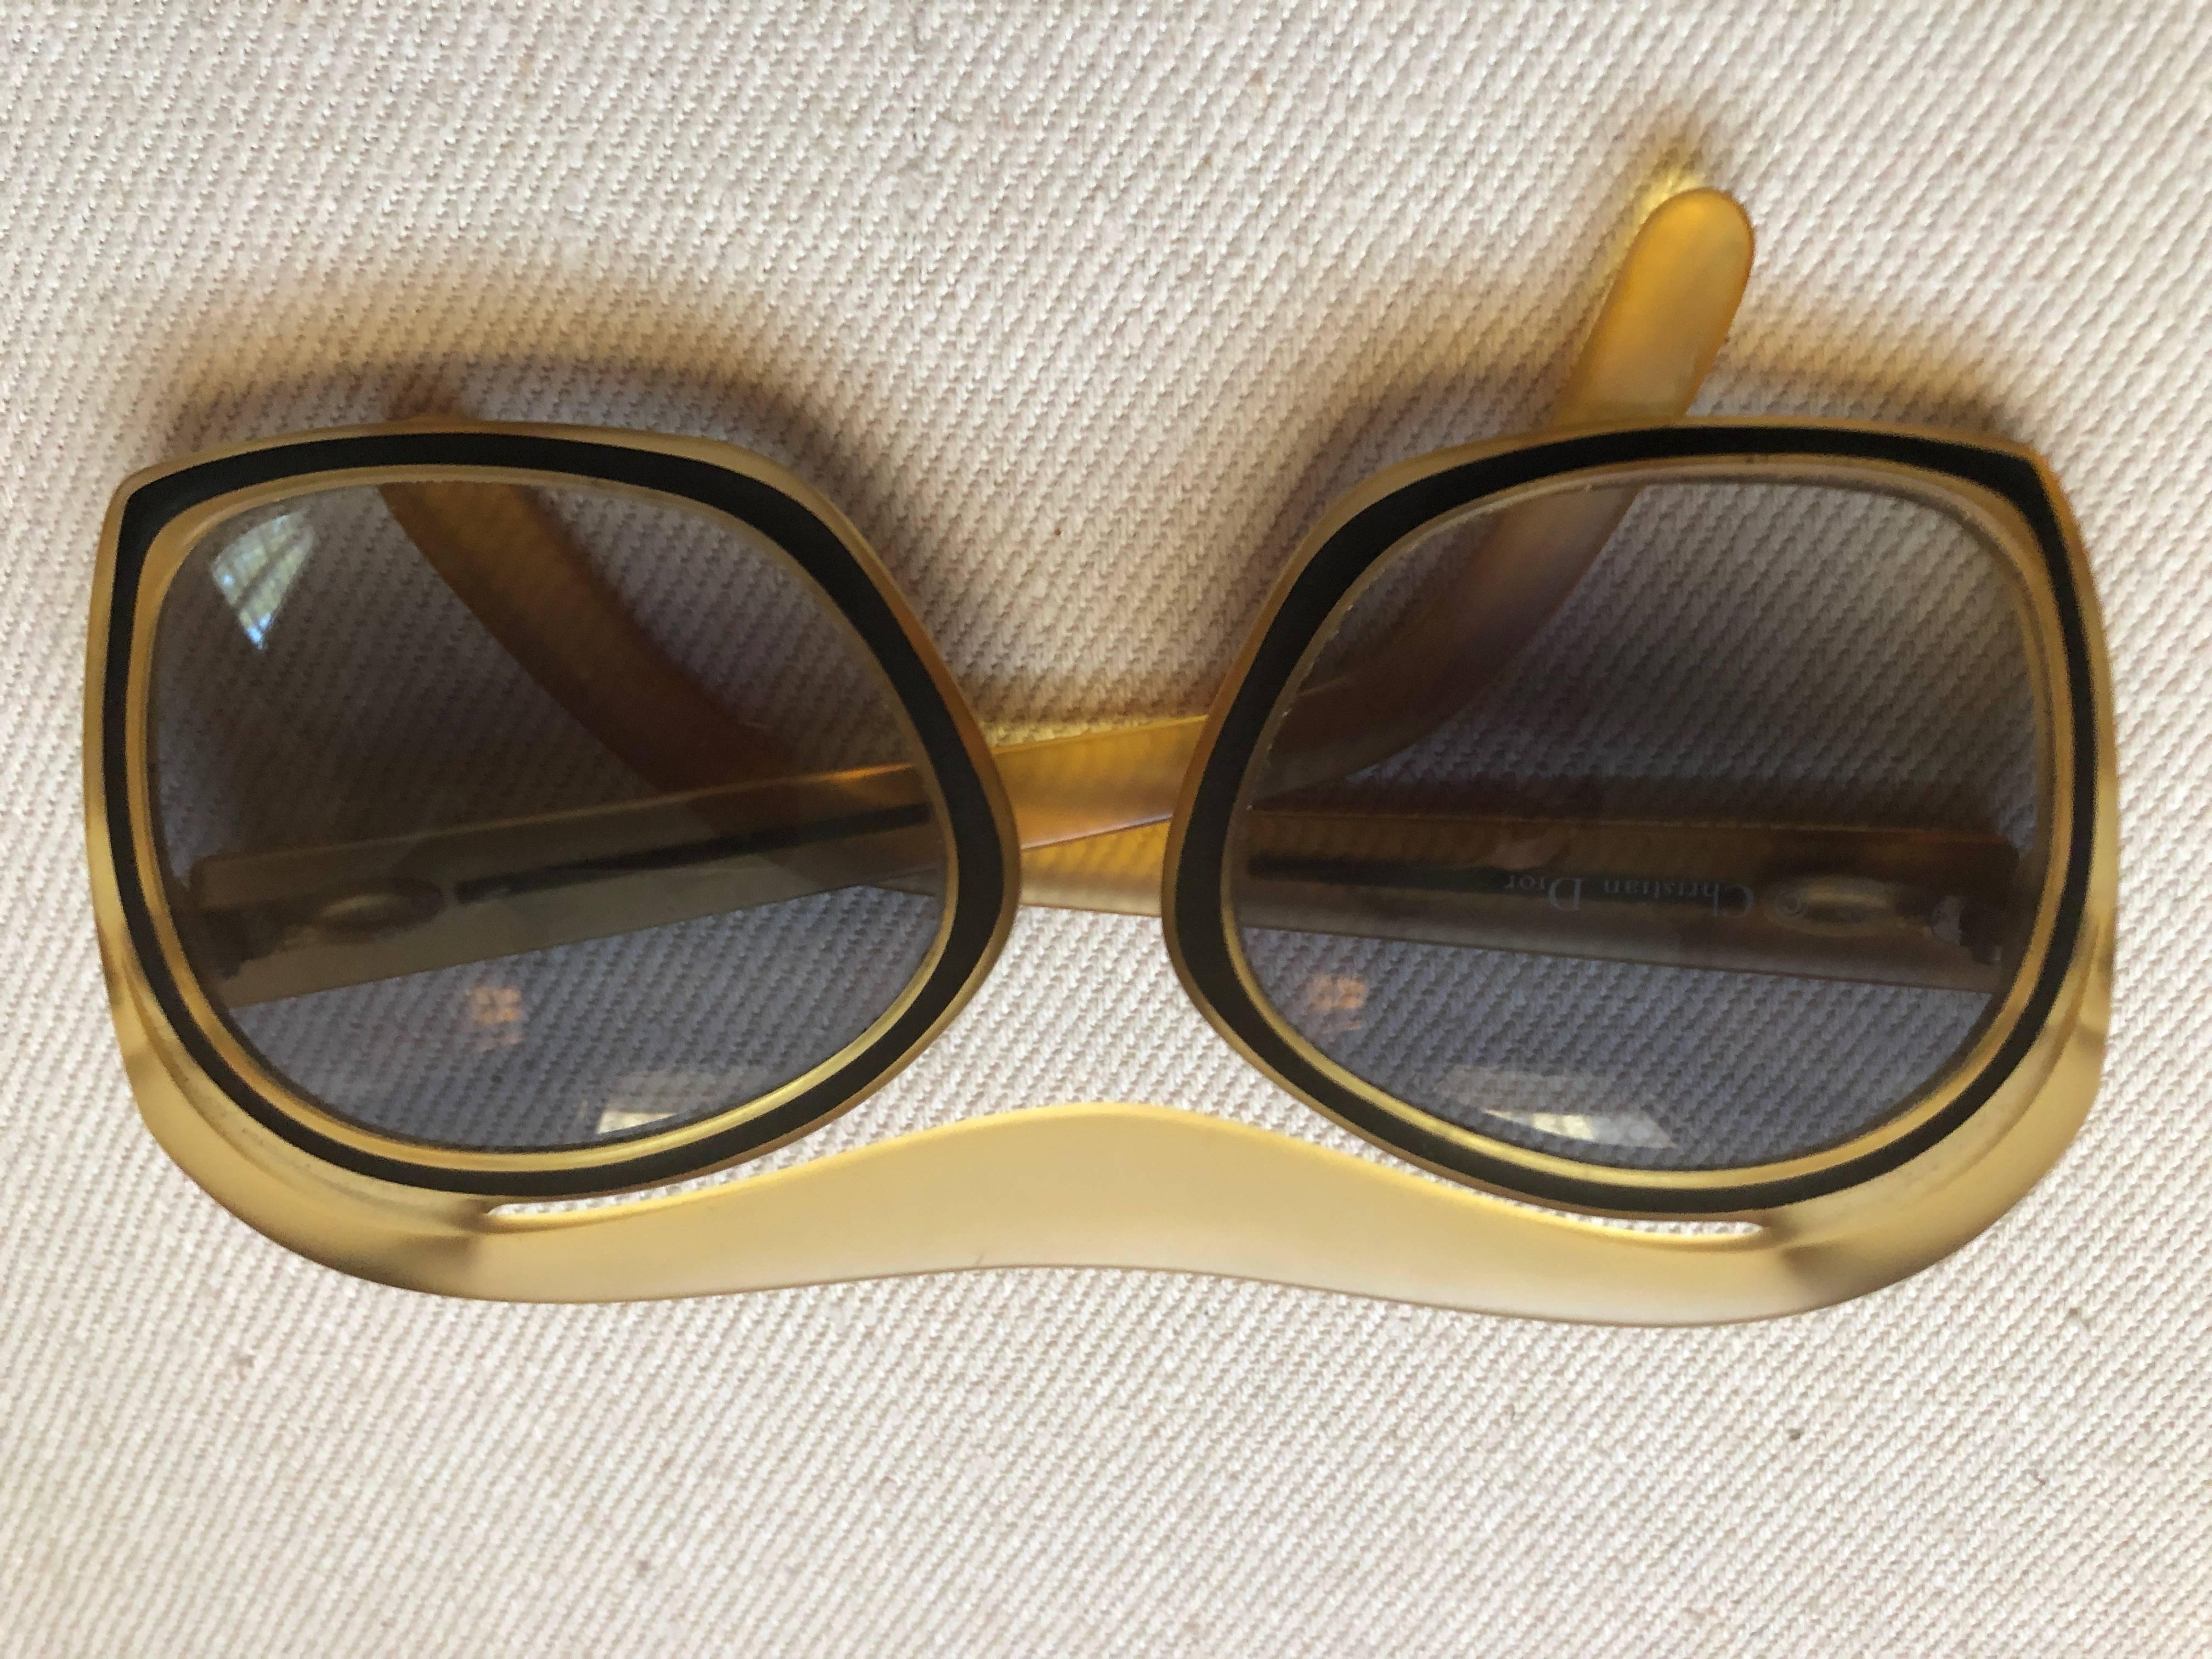 Christian Dior Futuristic 70's Vintage Oversize Sunglasses Style #2043-70 In Excellent Condition For Sale In Cloverdale, CA